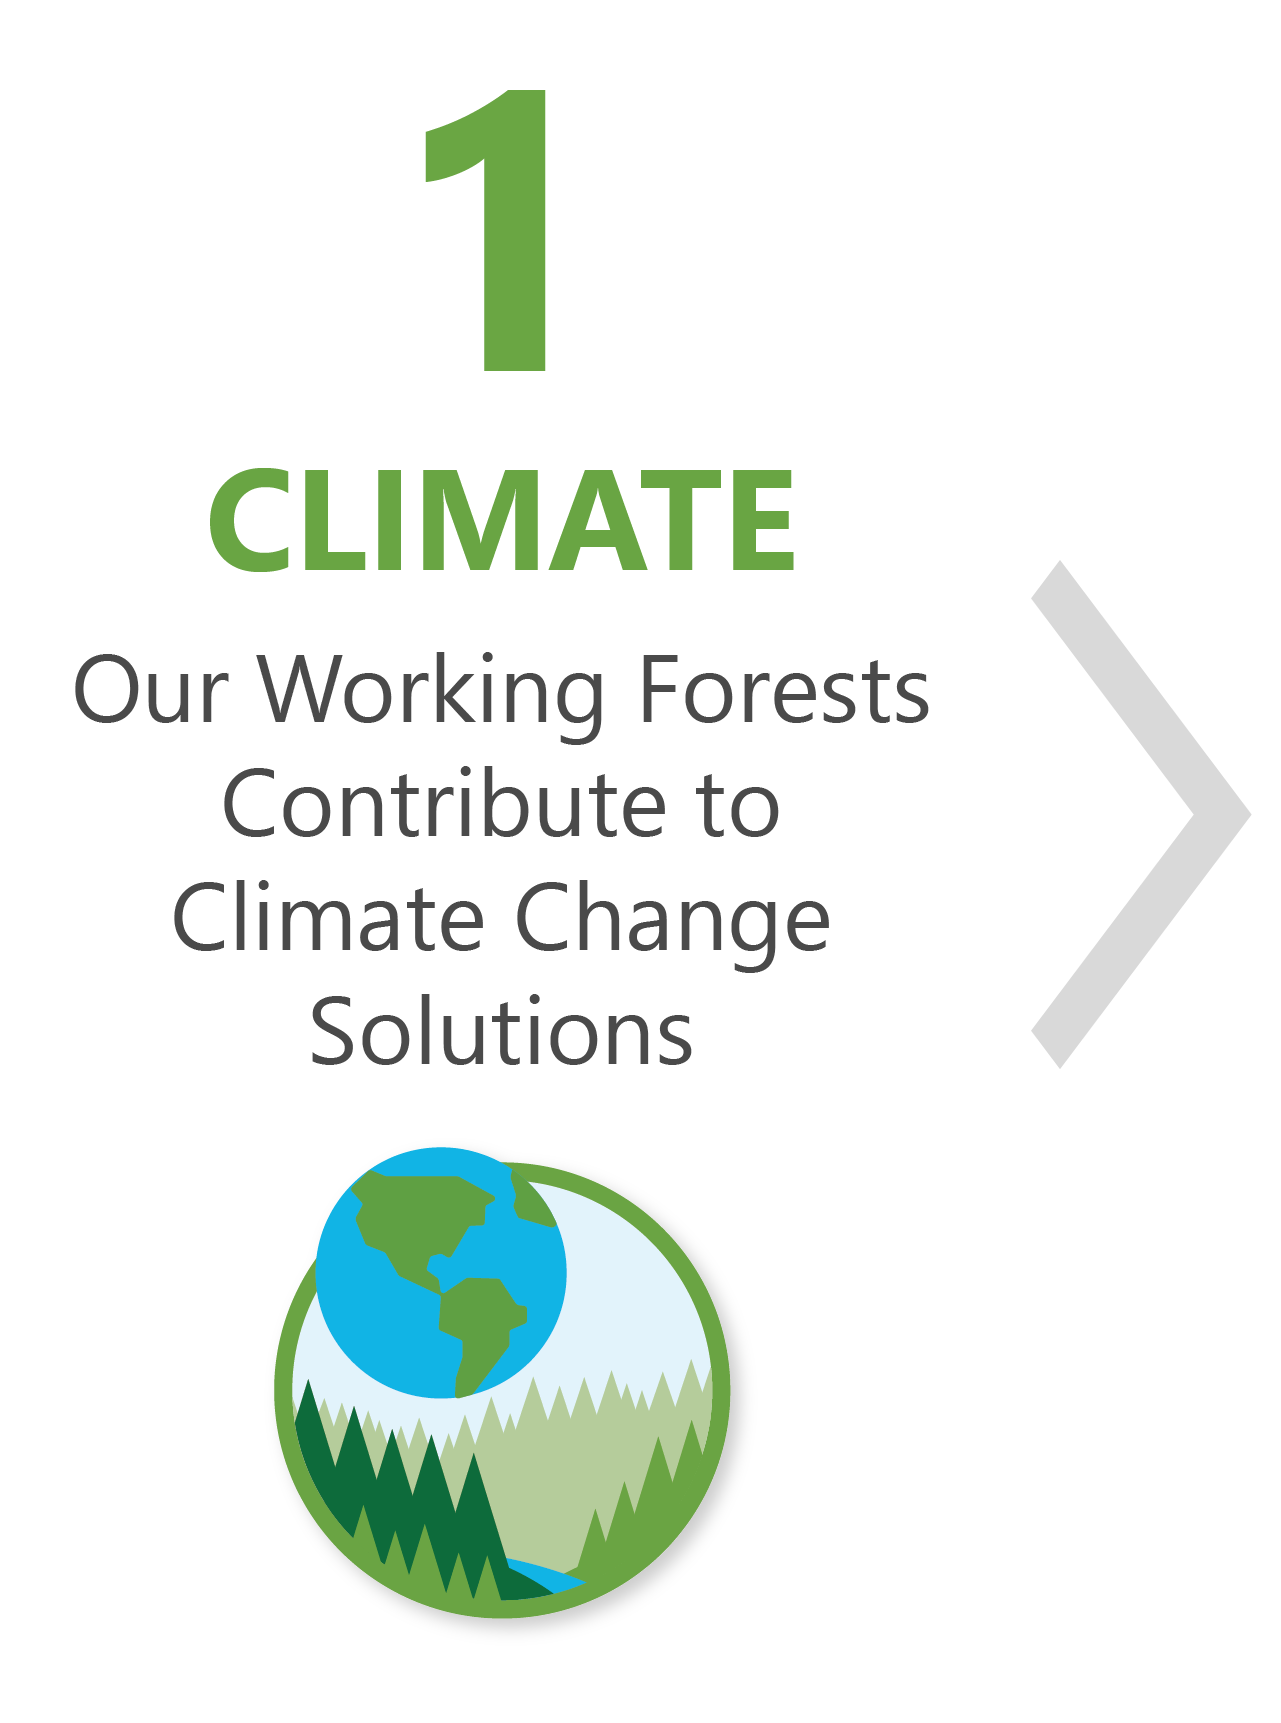 Climate: Our Working Forests Contribute To Climate Change Solutions